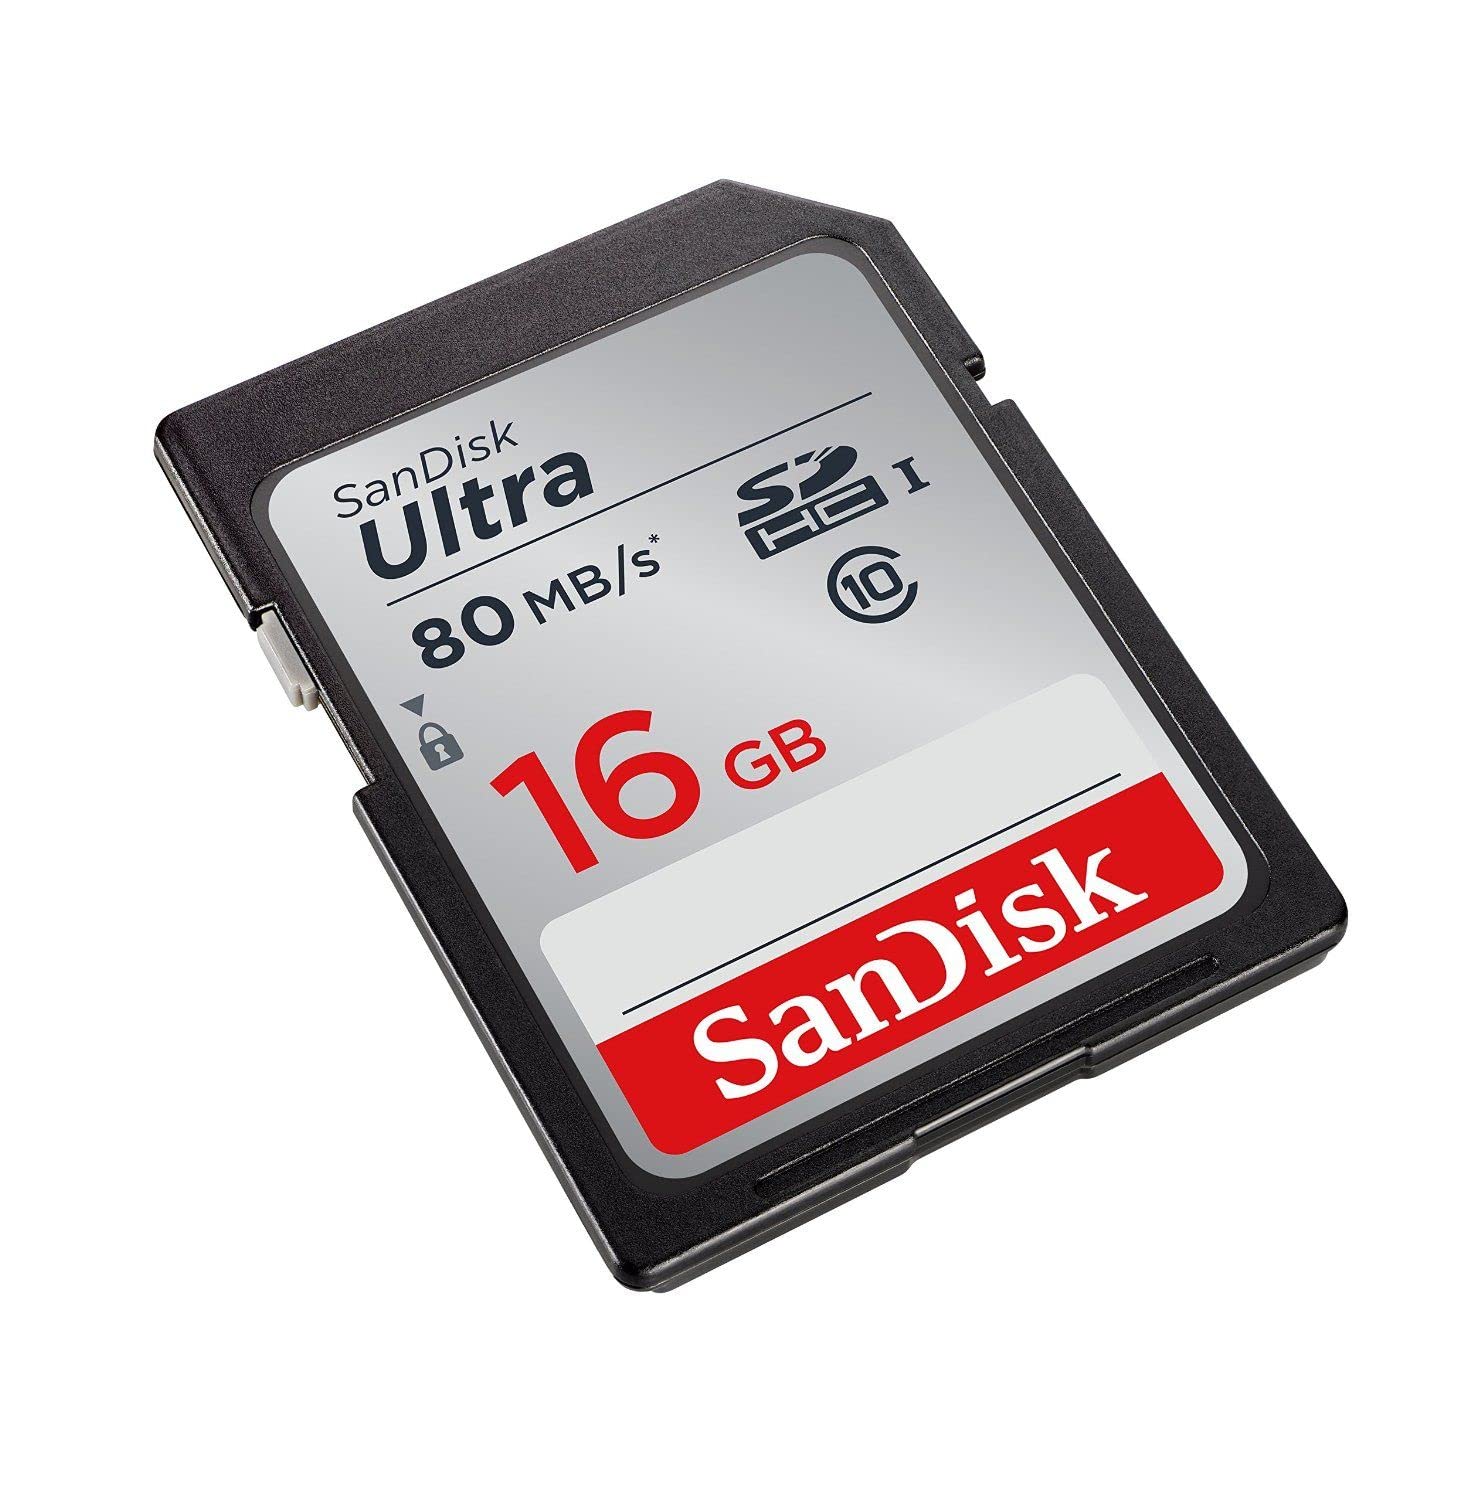 SanDisk Ultra 16 GB Memory Card $5.77 + Free Shipping w/ Prime or on $35+